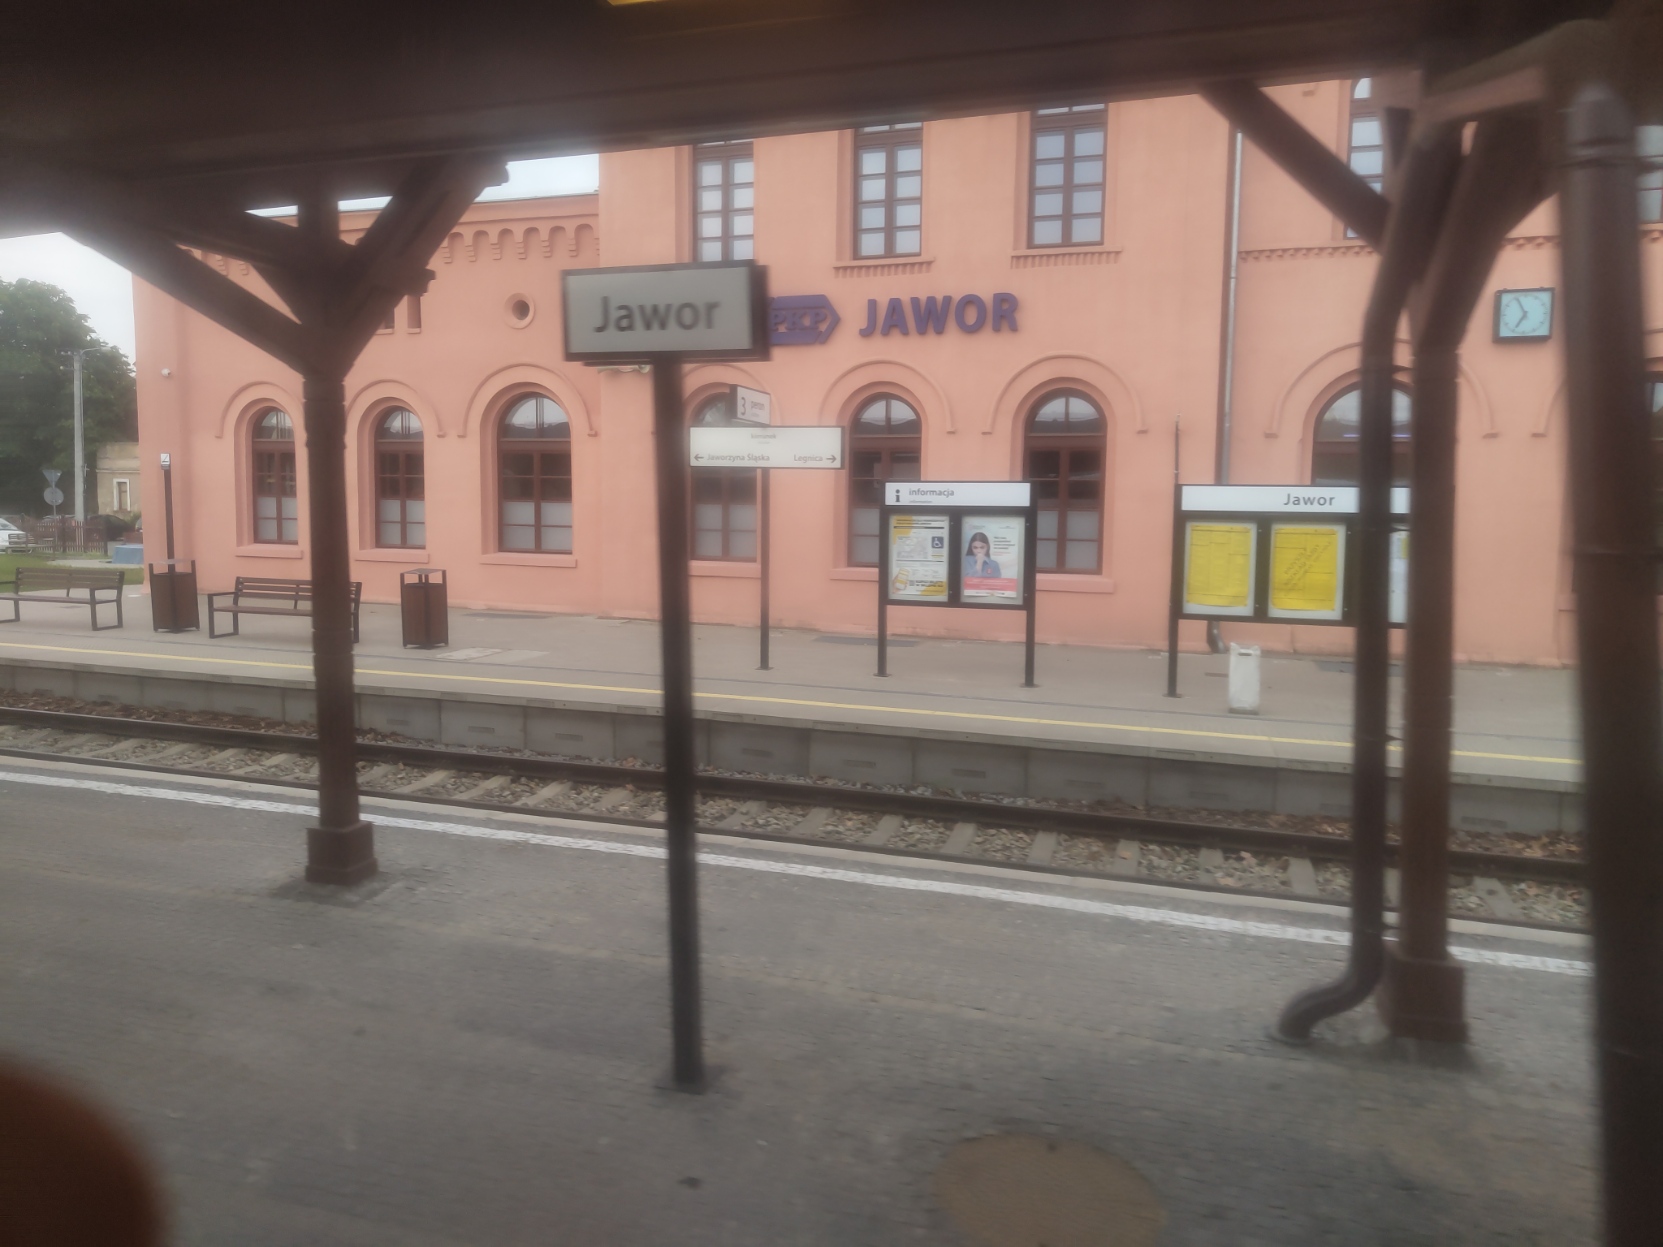 Photo of railway platforms with signs that have modern black sans serif lettering on white signs with black border